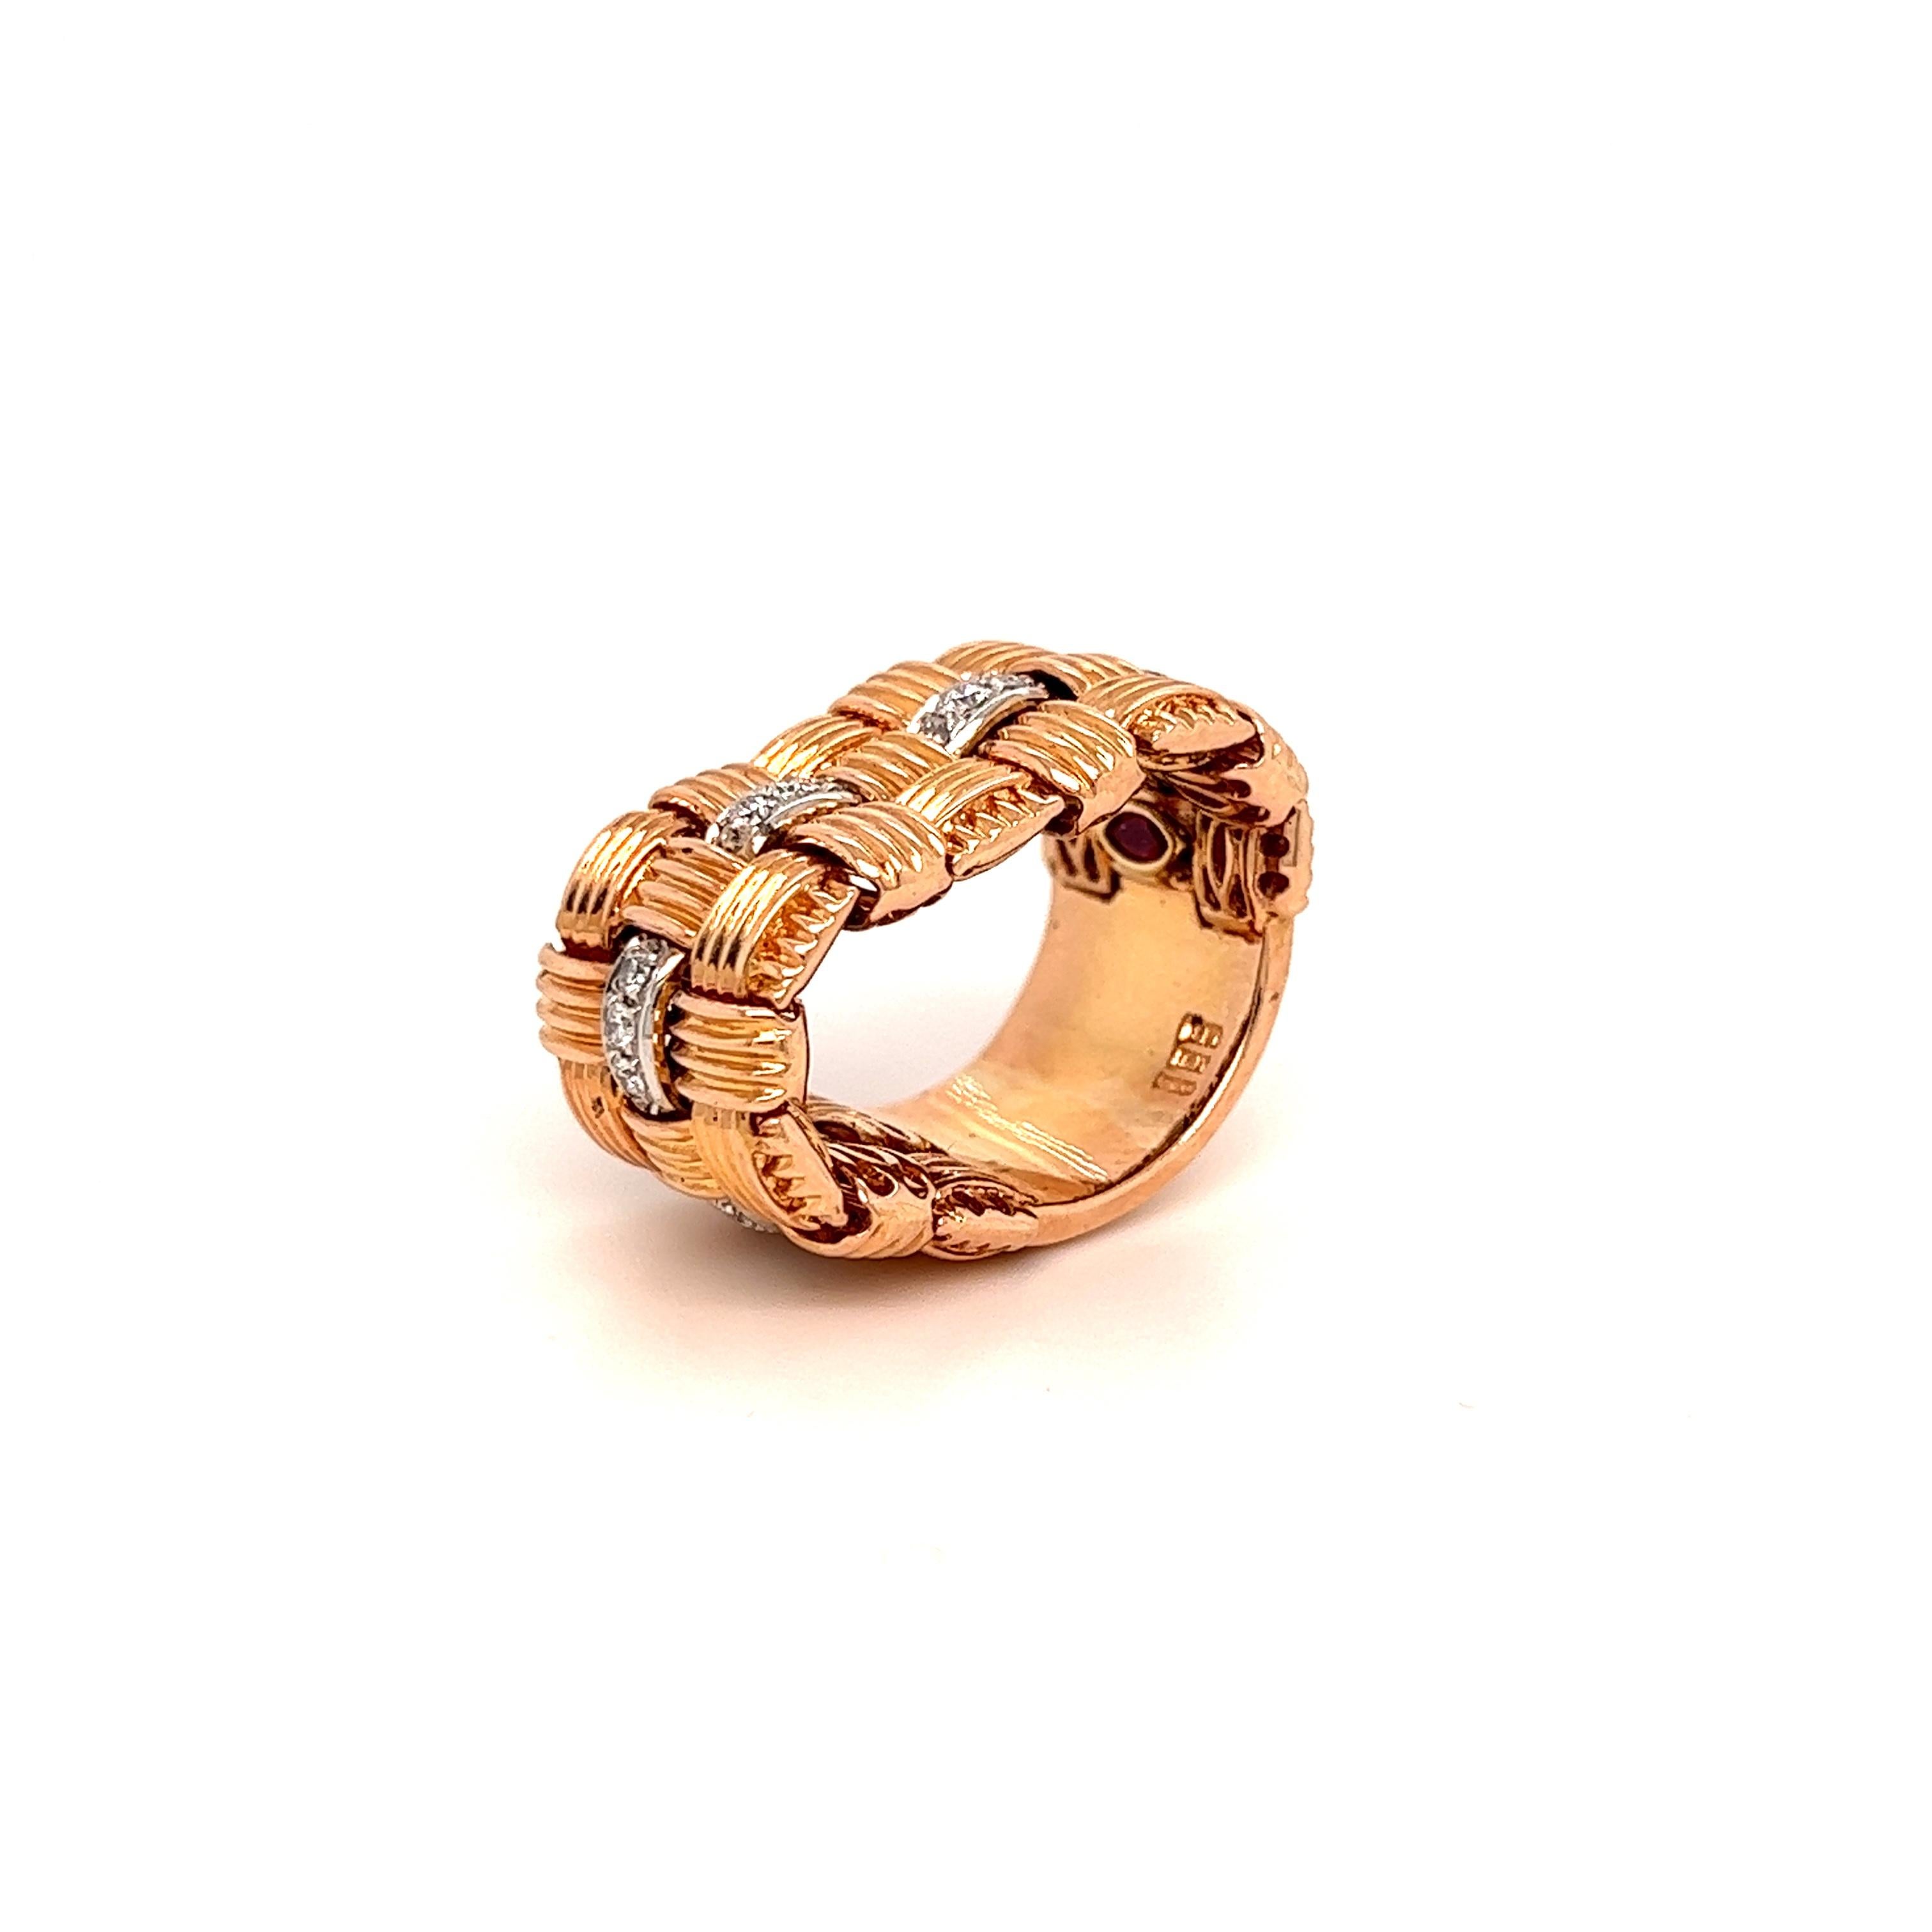 Roberto Coin Appasionata 18K Rose Gold and Diamond Three Row Band Ring

A flexible band ring, this is the three row version with 5 diamond sections

Apprx. 0.30ct. G color, VS clarity diamonds total weight

Size 7.

Signed Roberto Coin and has the